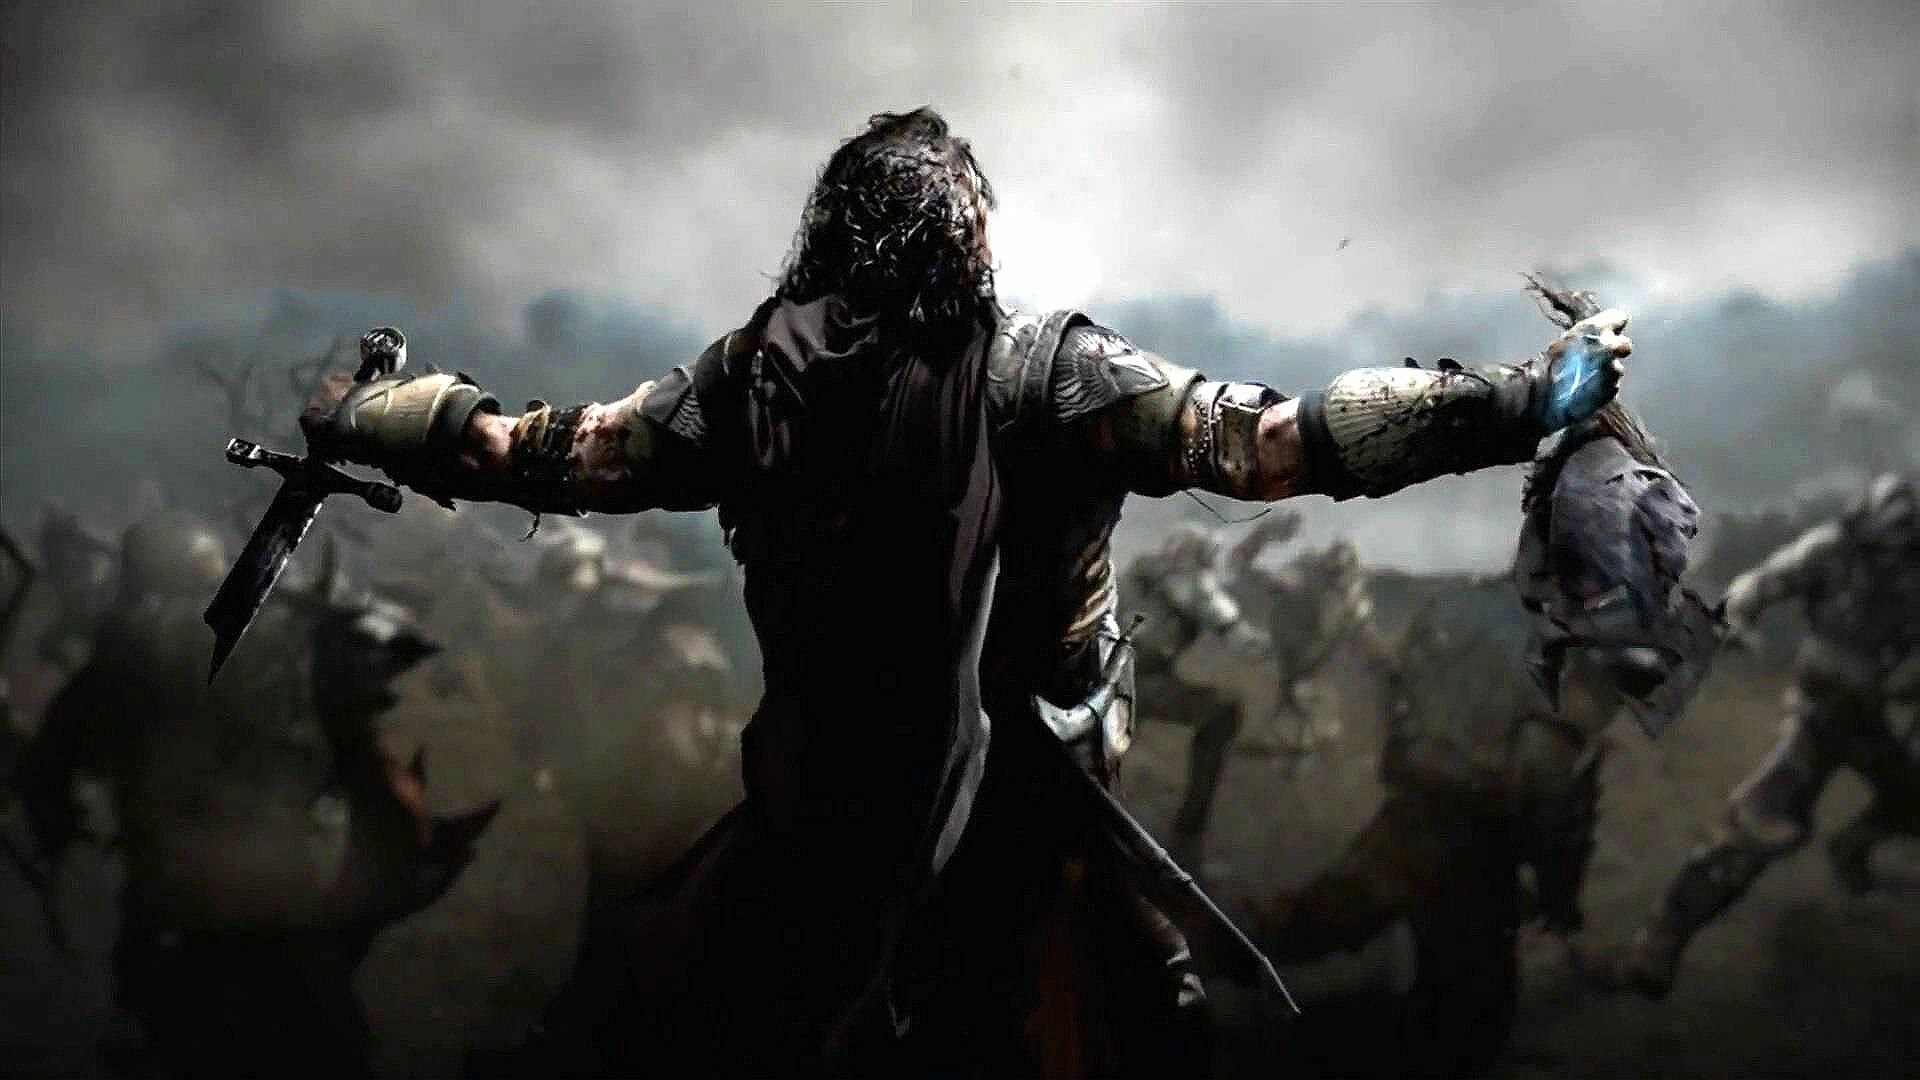 The Lord of the Rings: Middle Earth, Mordor, Fantasy, Adventure. 1920x1080 Full HD Wallpaper.